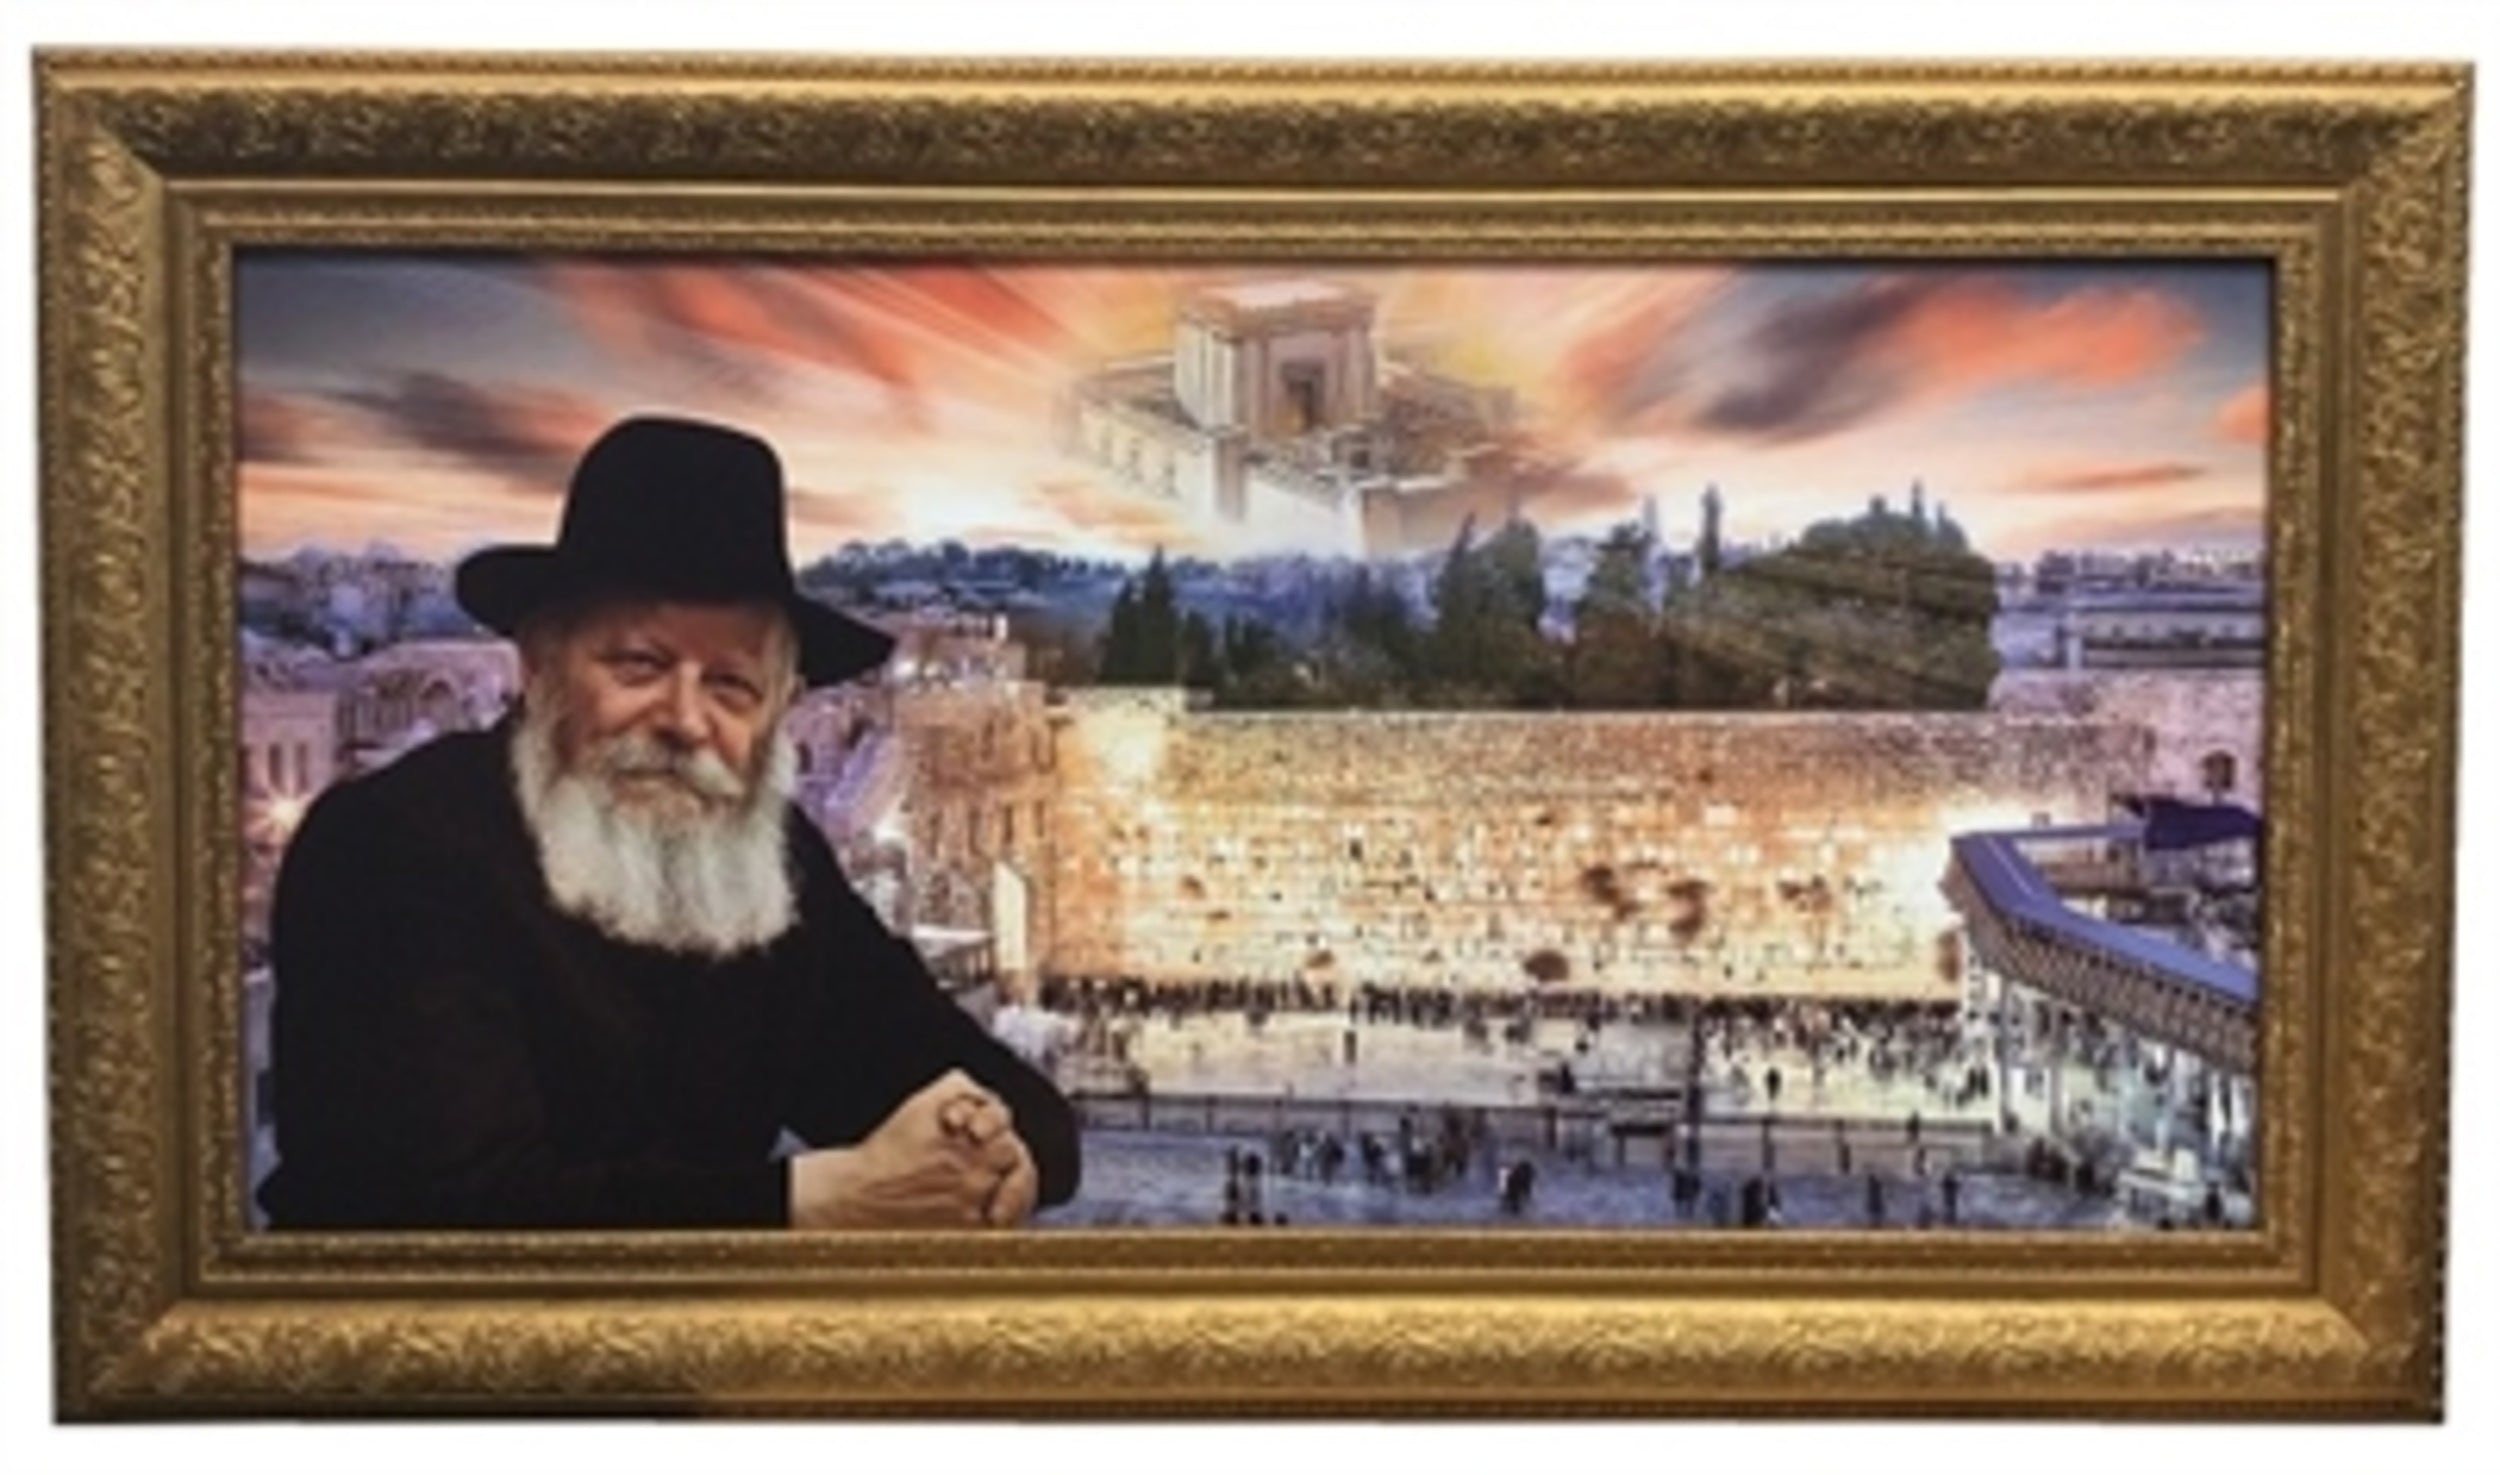 The Kotel with the Lubavitcher Rebbe